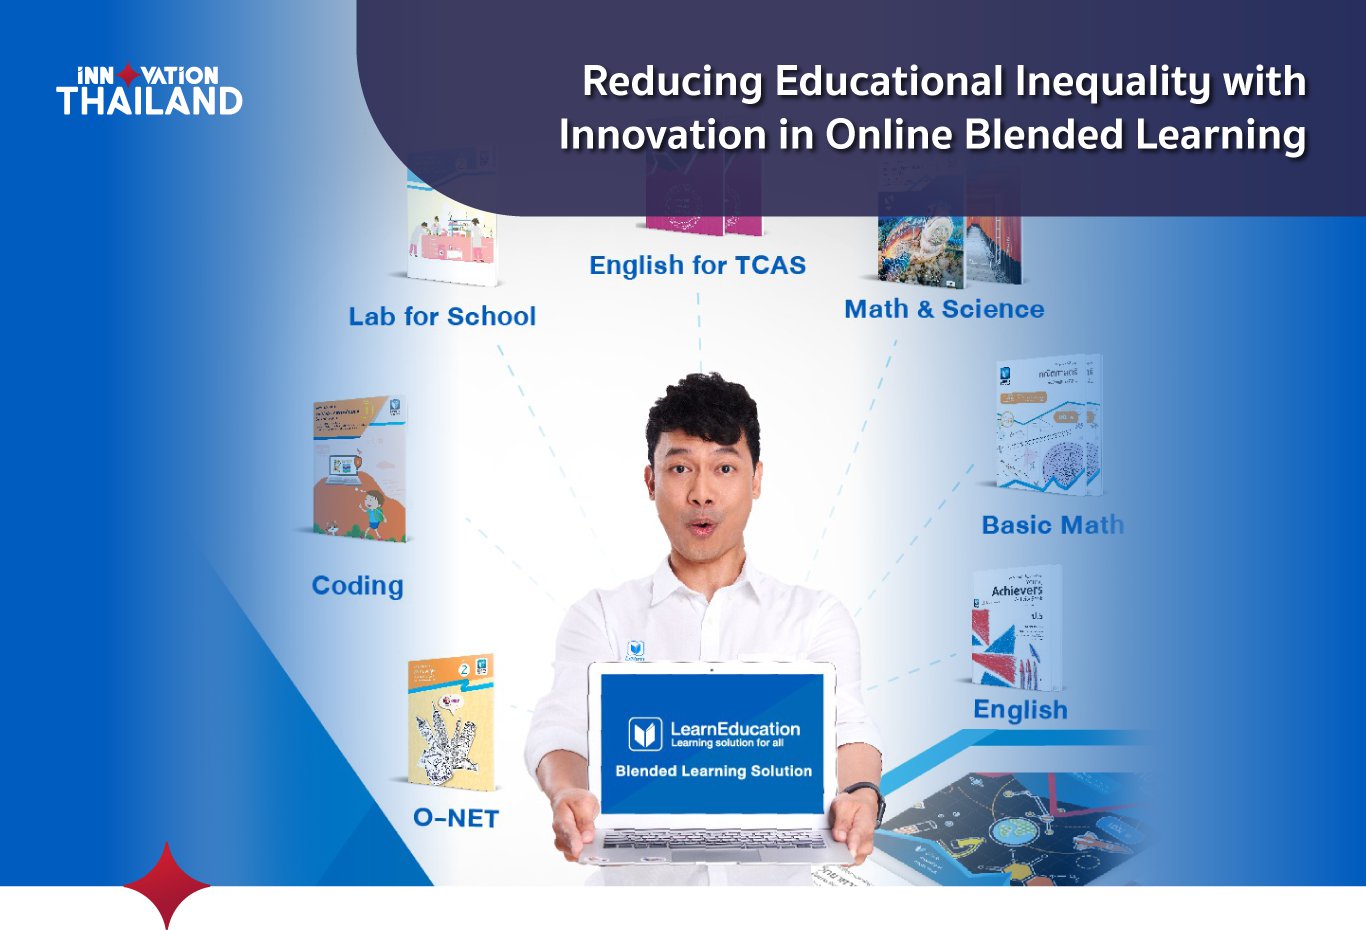 Reducing Educational Inequality with Innovation in Online Blended Learning